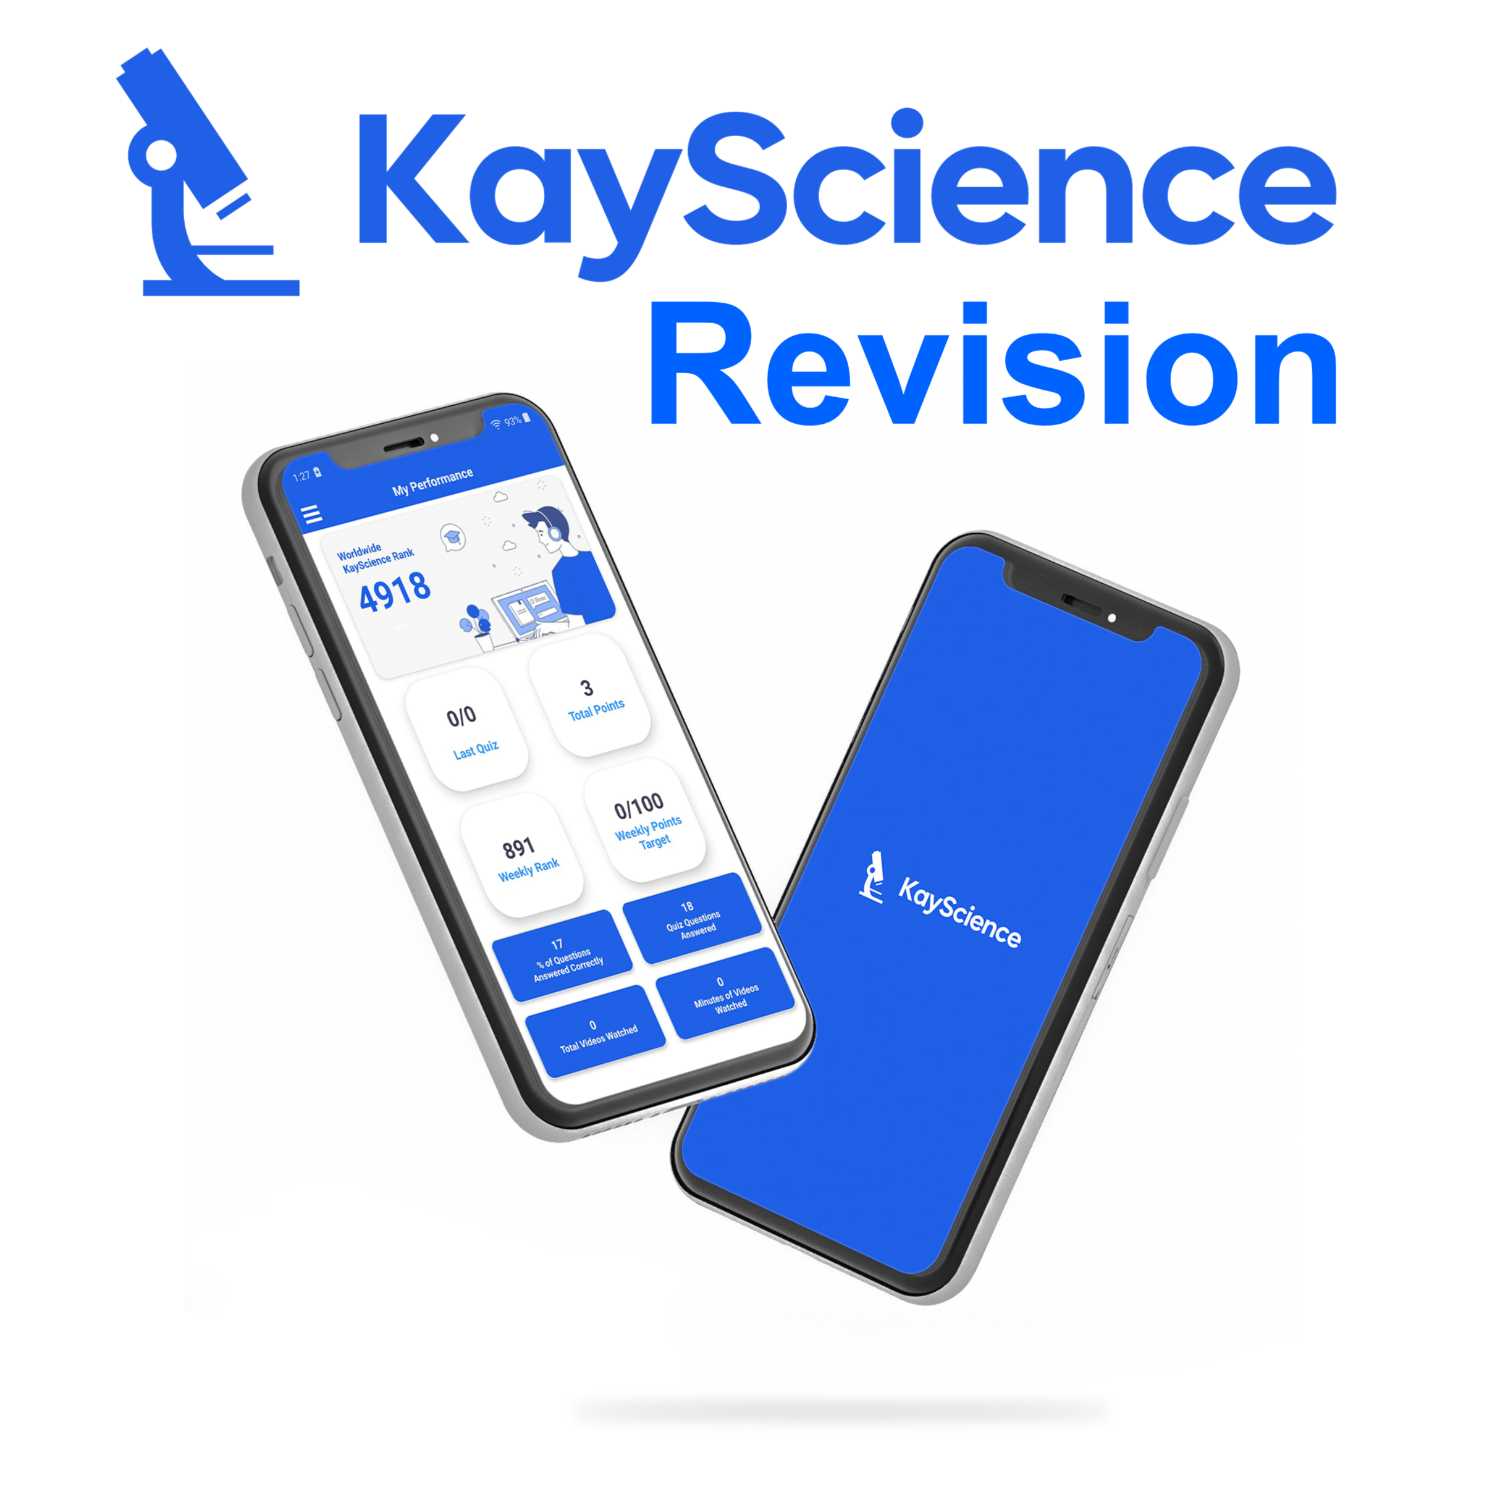 GCSE Physics Audio: Mgnetism & Electromagnetism by KayScience.com